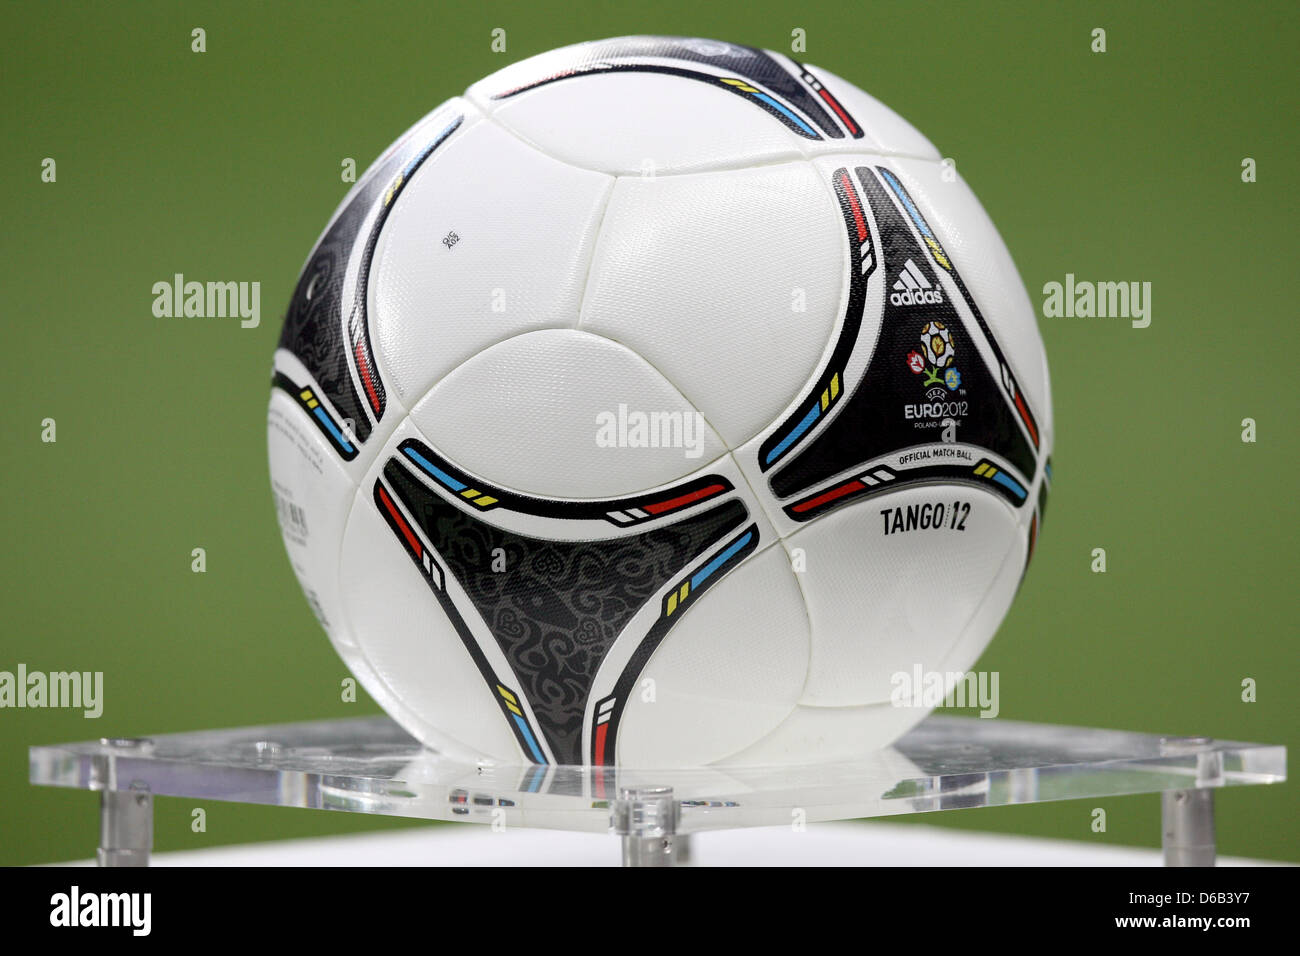 The ball 'Tango 12' by adidas lies a pedestal before the international soccer match between Germany and Argentina at the Commerzbank-Arena in Frankfurt Main, Germany, 15 August 2012. Photo: Fredrik